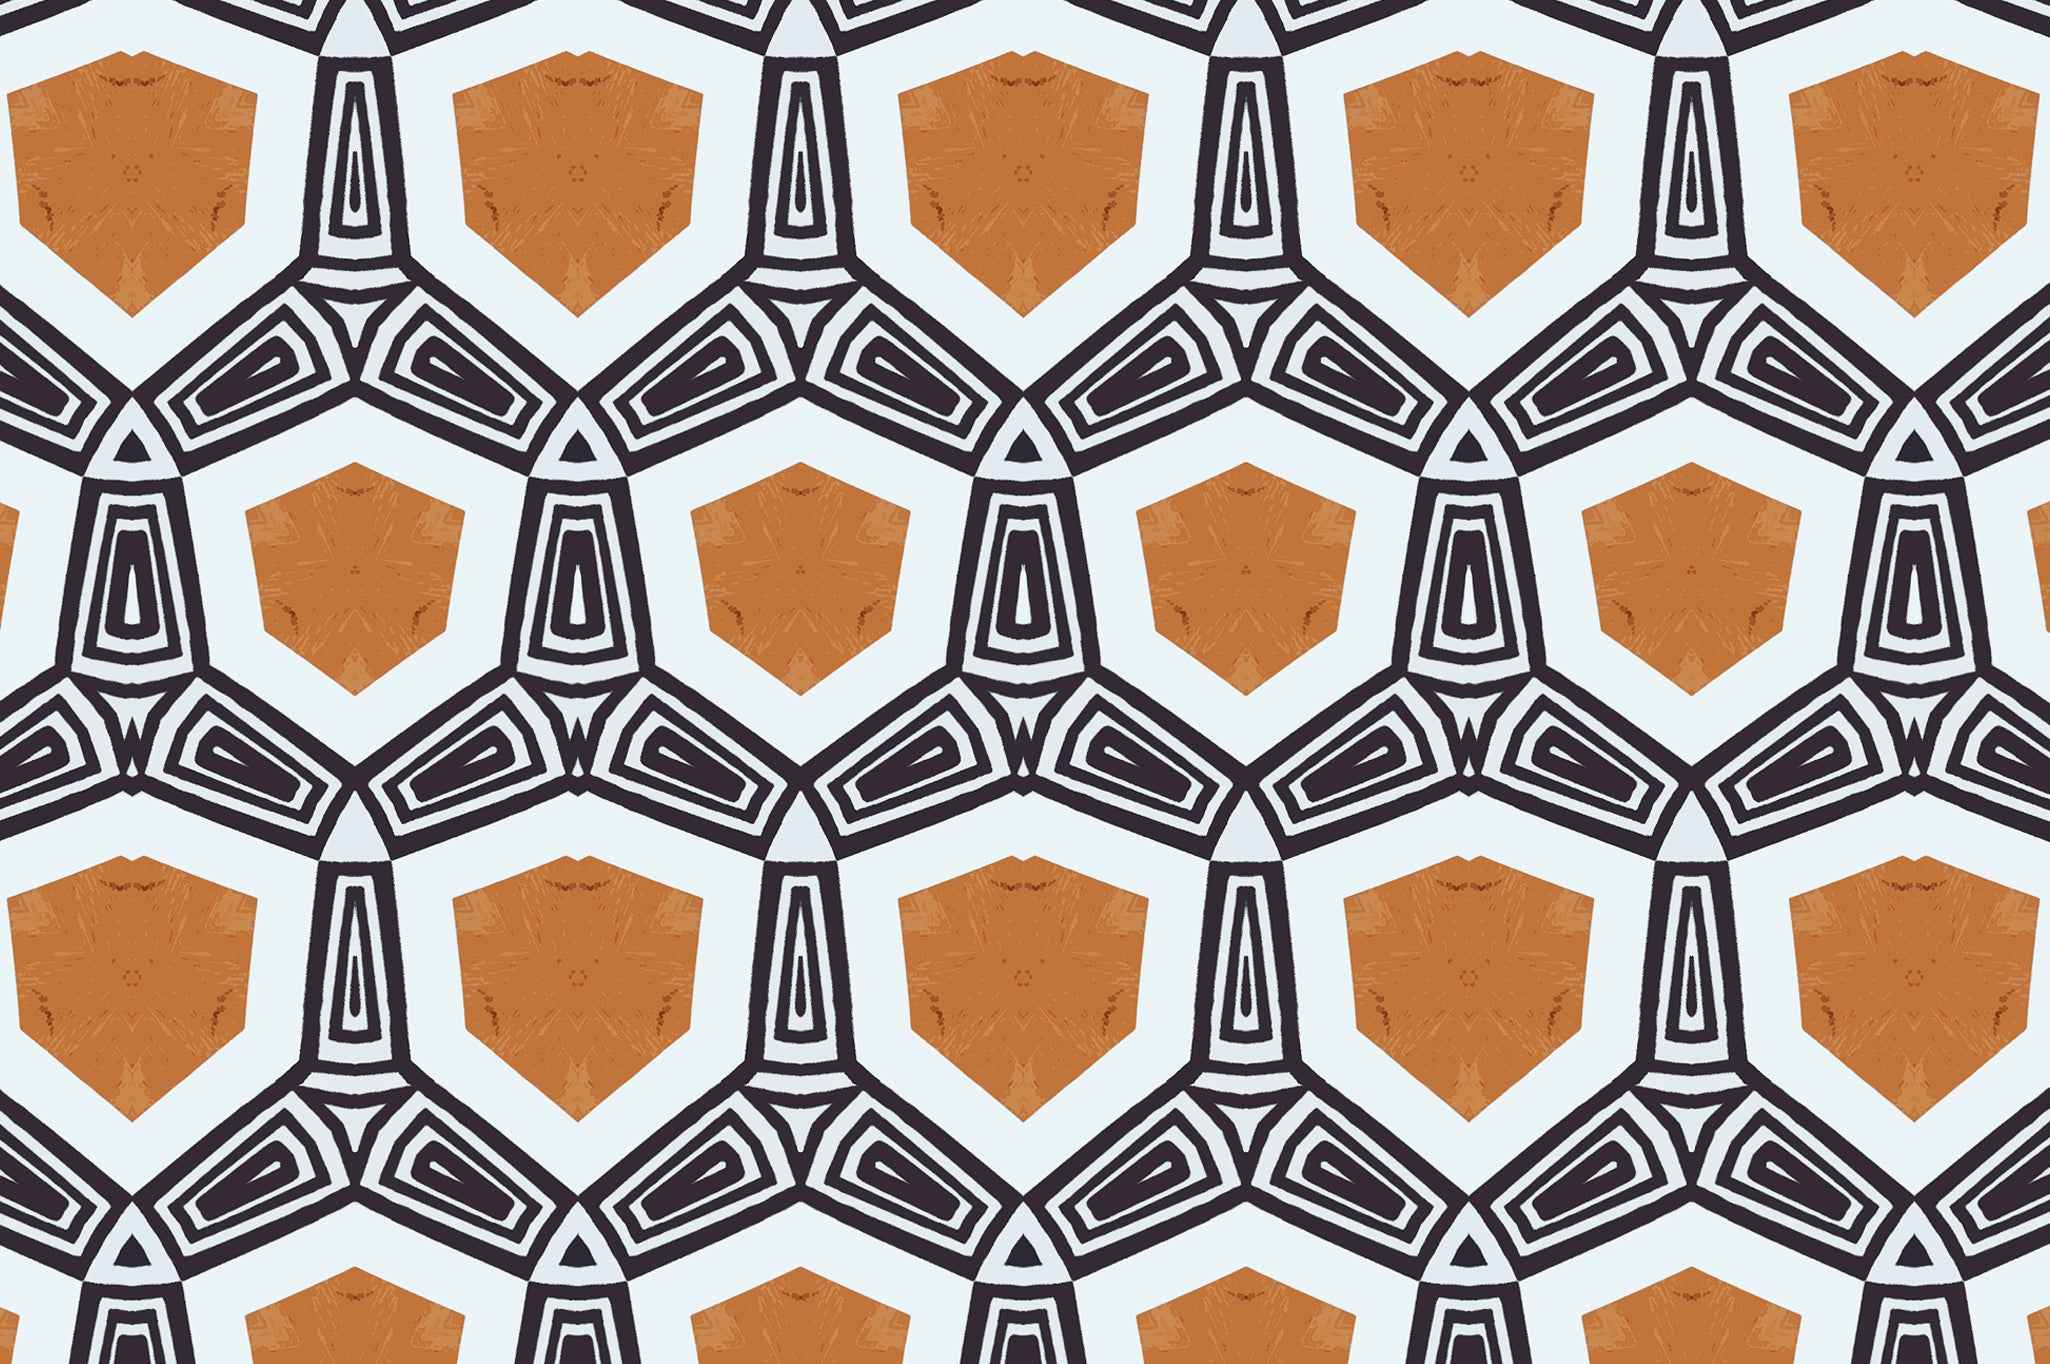 Detail of fabric in a geometric tribal print in shades of gold and black on a white field.